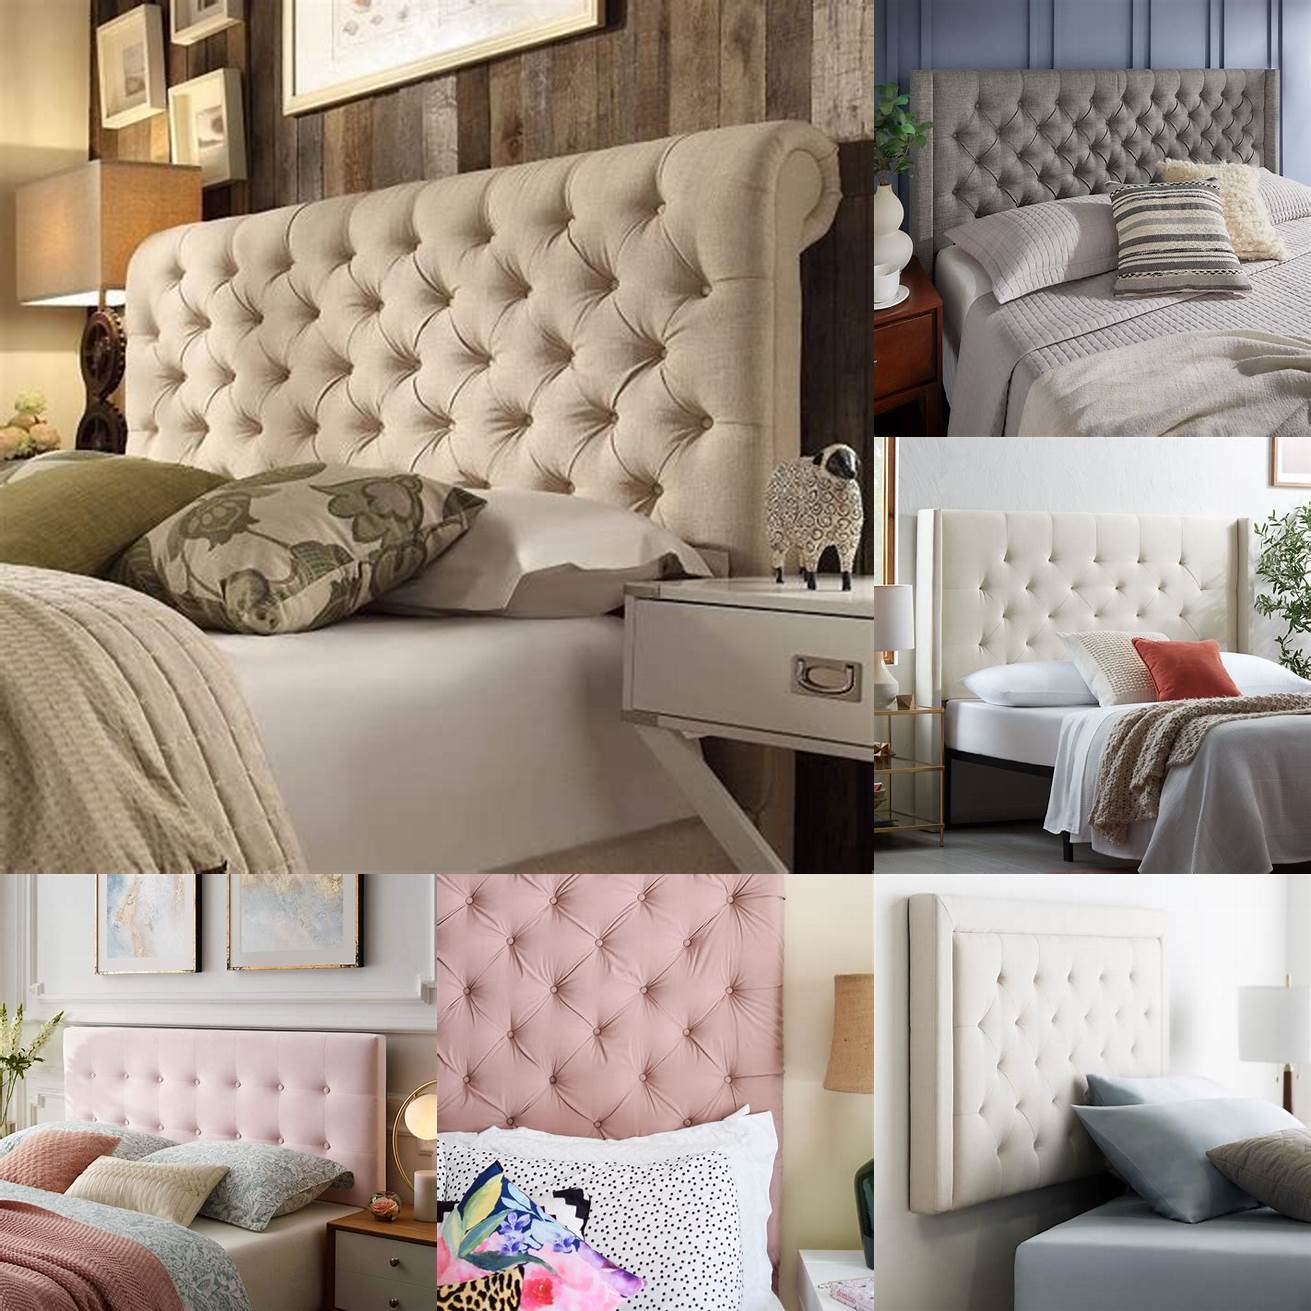 Style The tufted pattern of the headboard adds a touch of elegance and sophistication to your bedroom making it look more luxurious and inviting